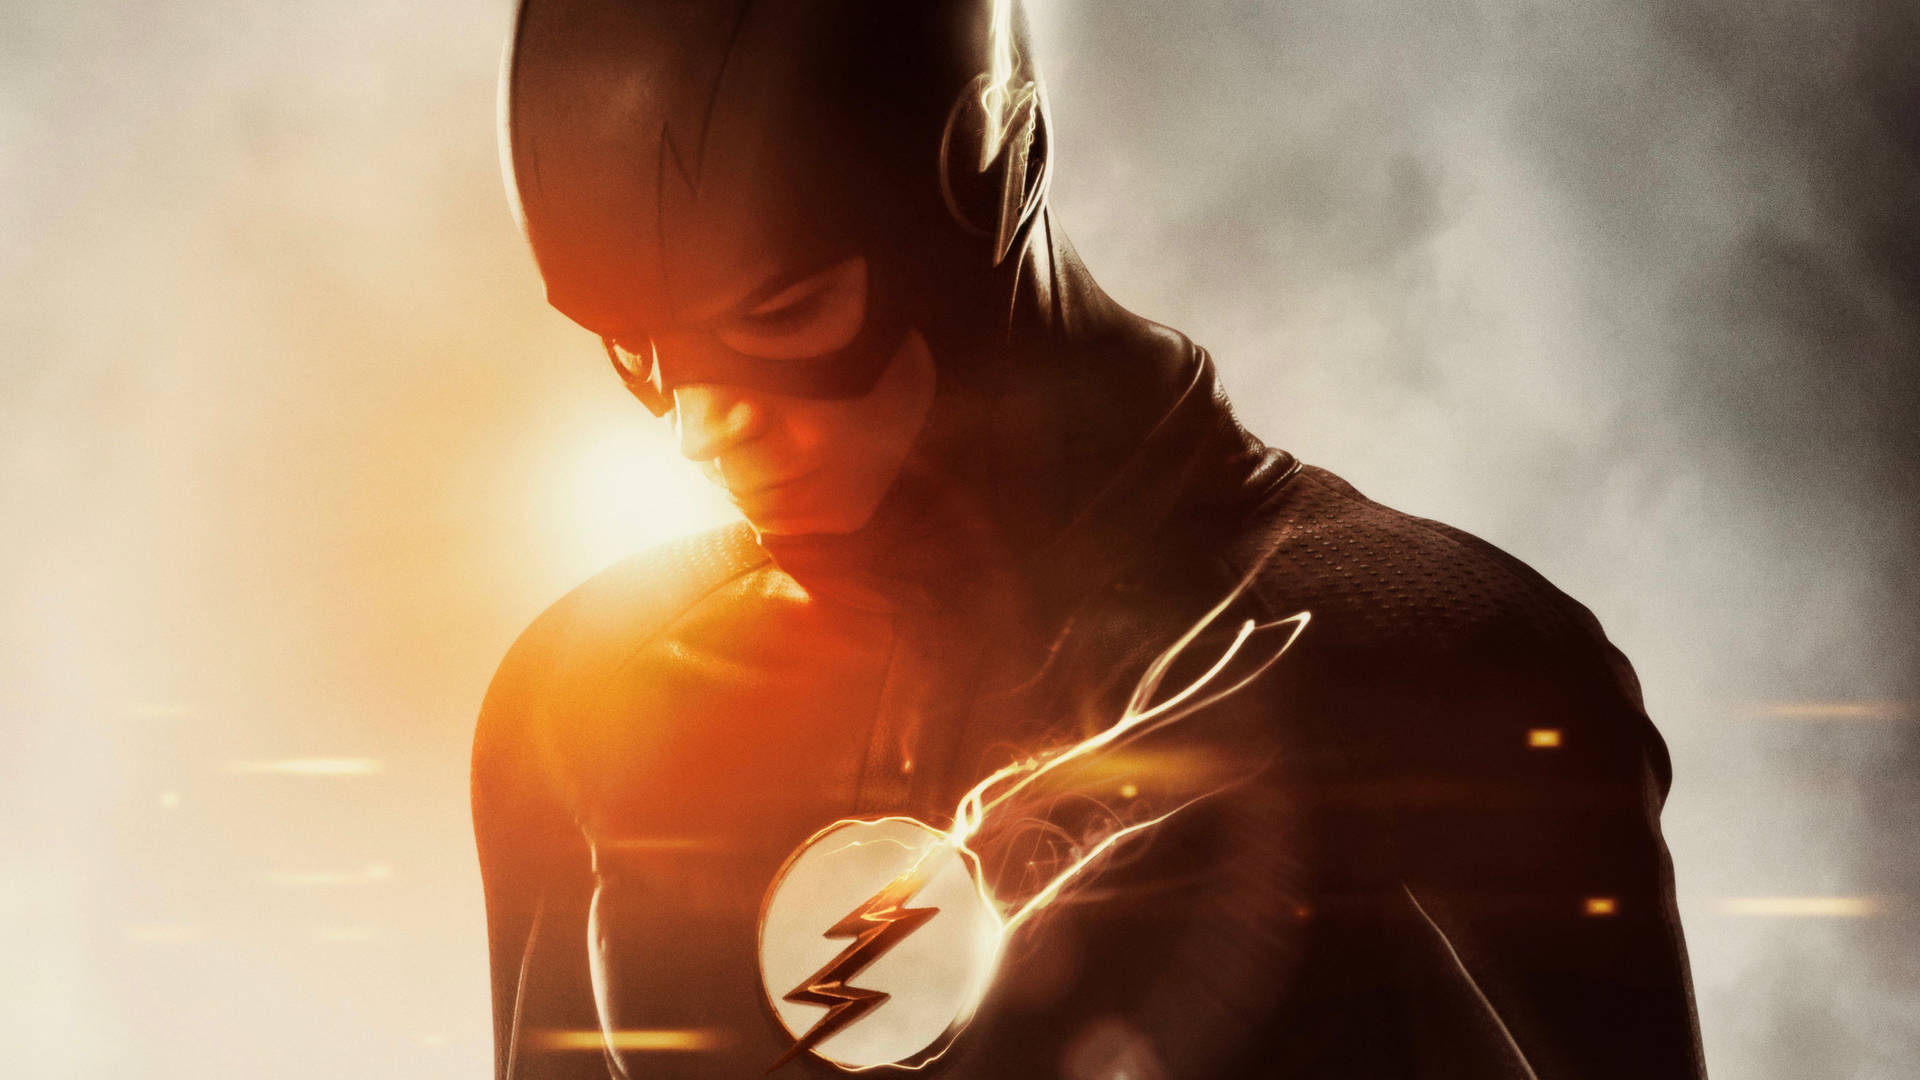 The Flash 6089X3425 Wallpaper and Background Image